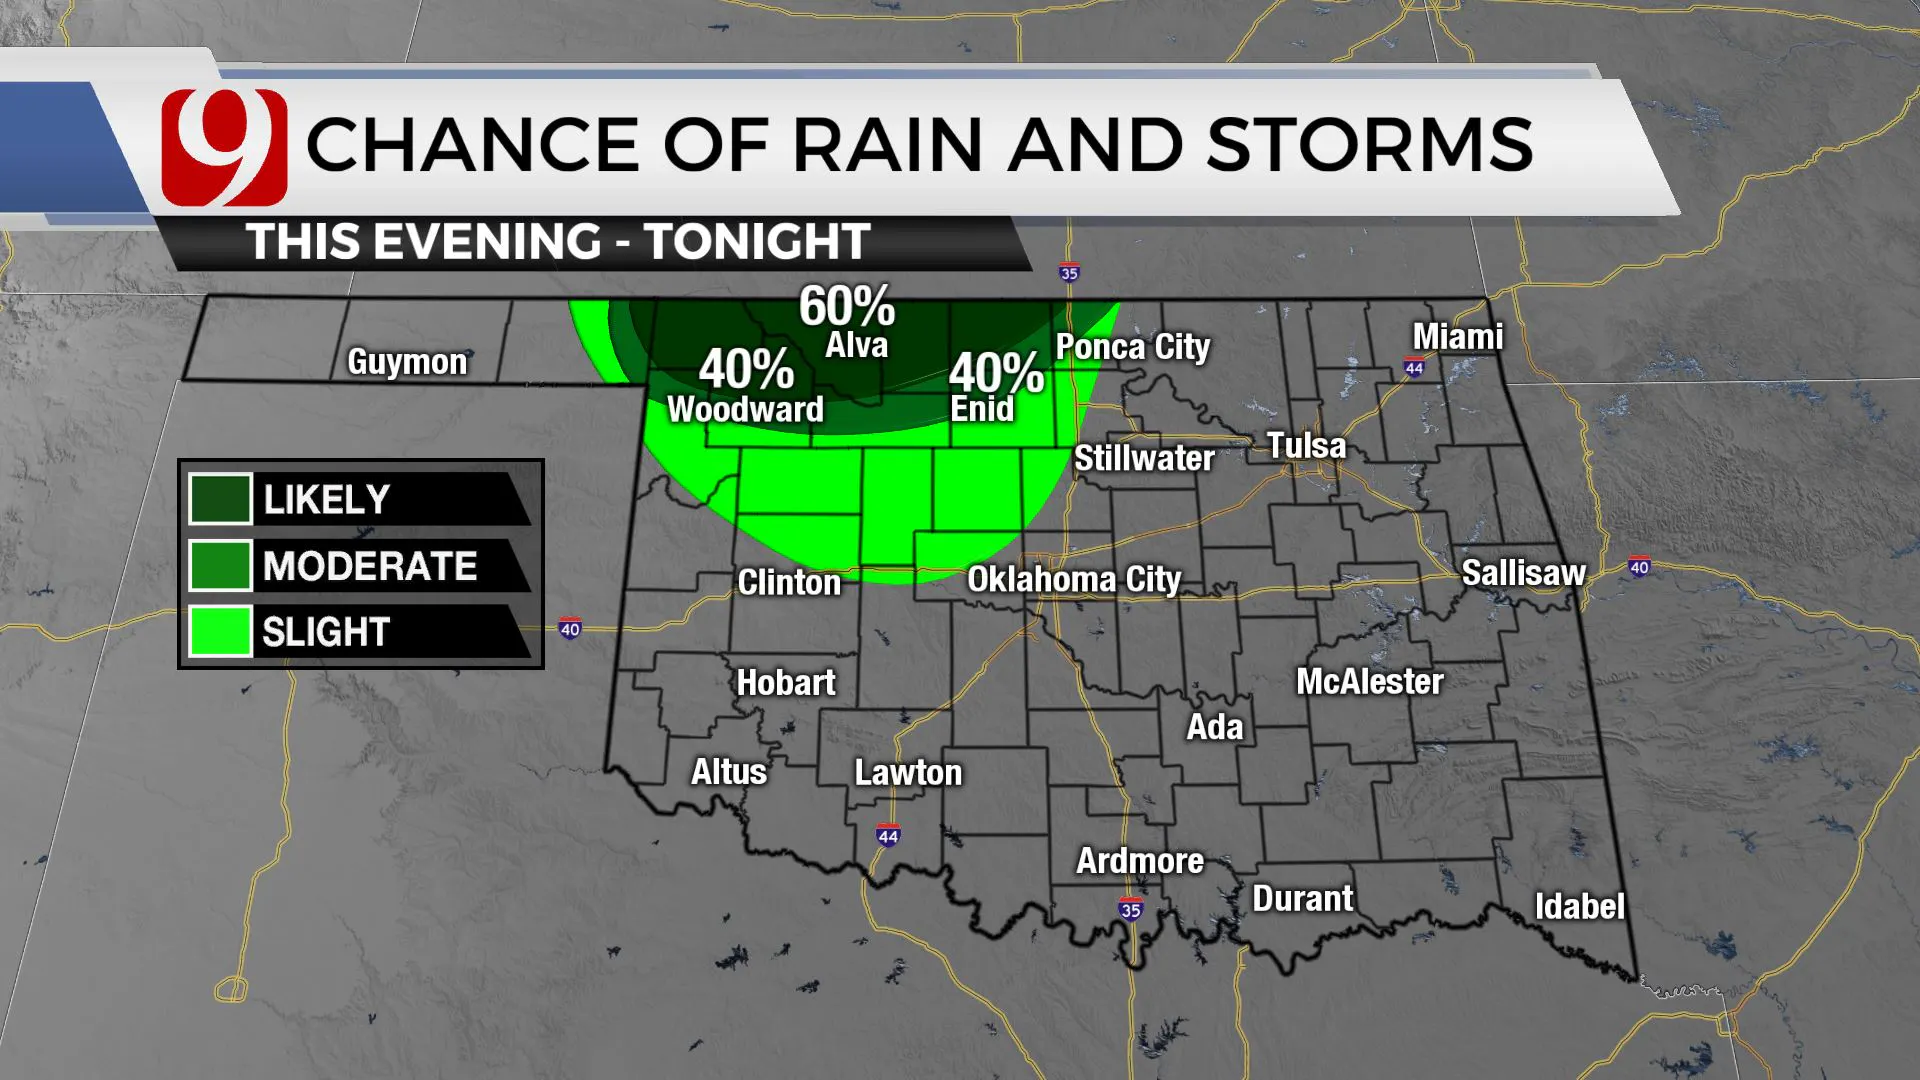 Chances of rain and storms this evening.